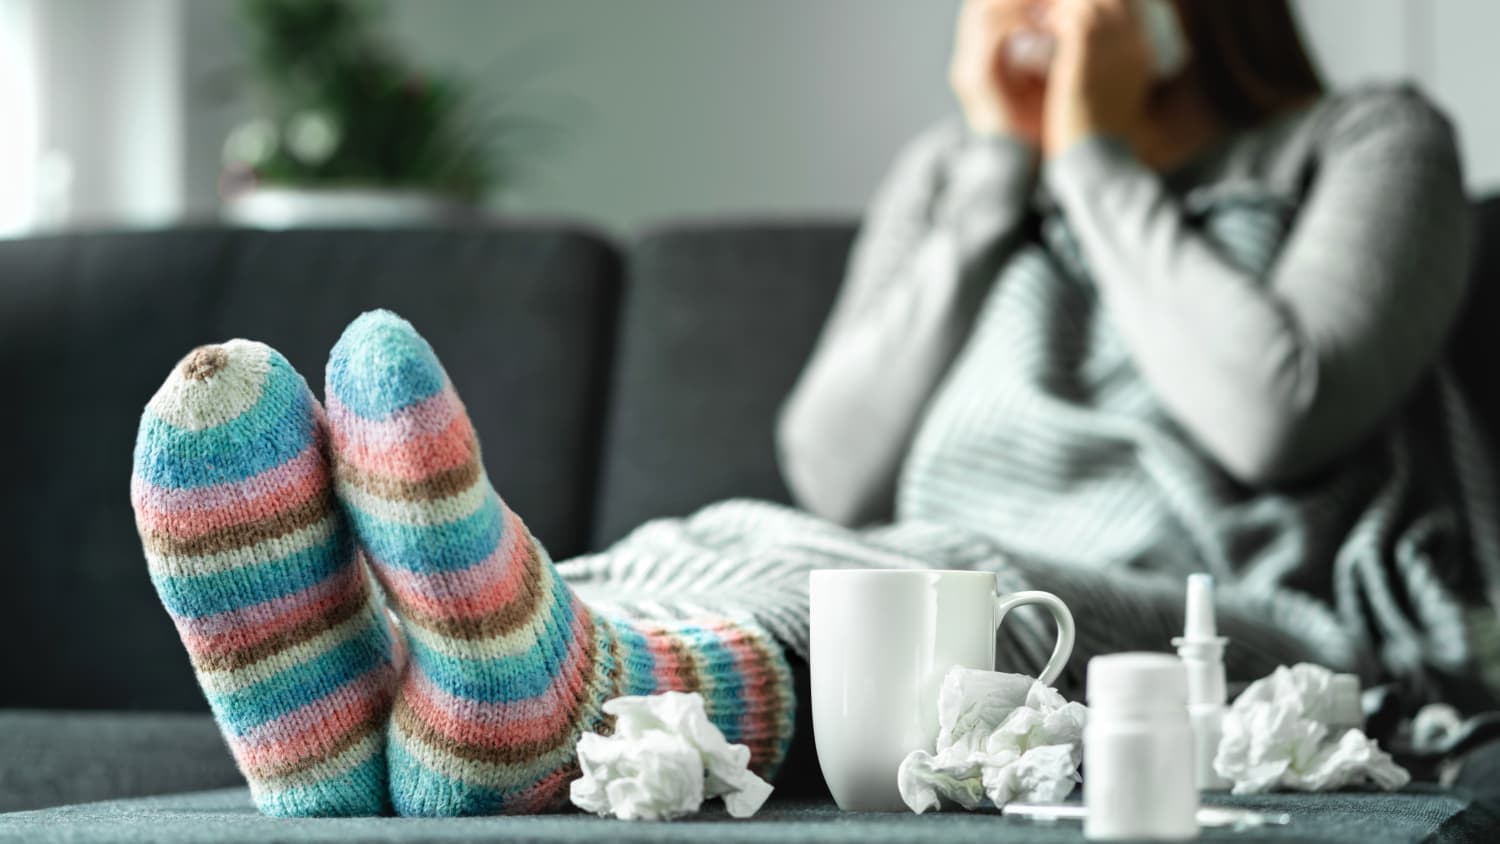 person on the couch sick with cold, flu, or covid-19